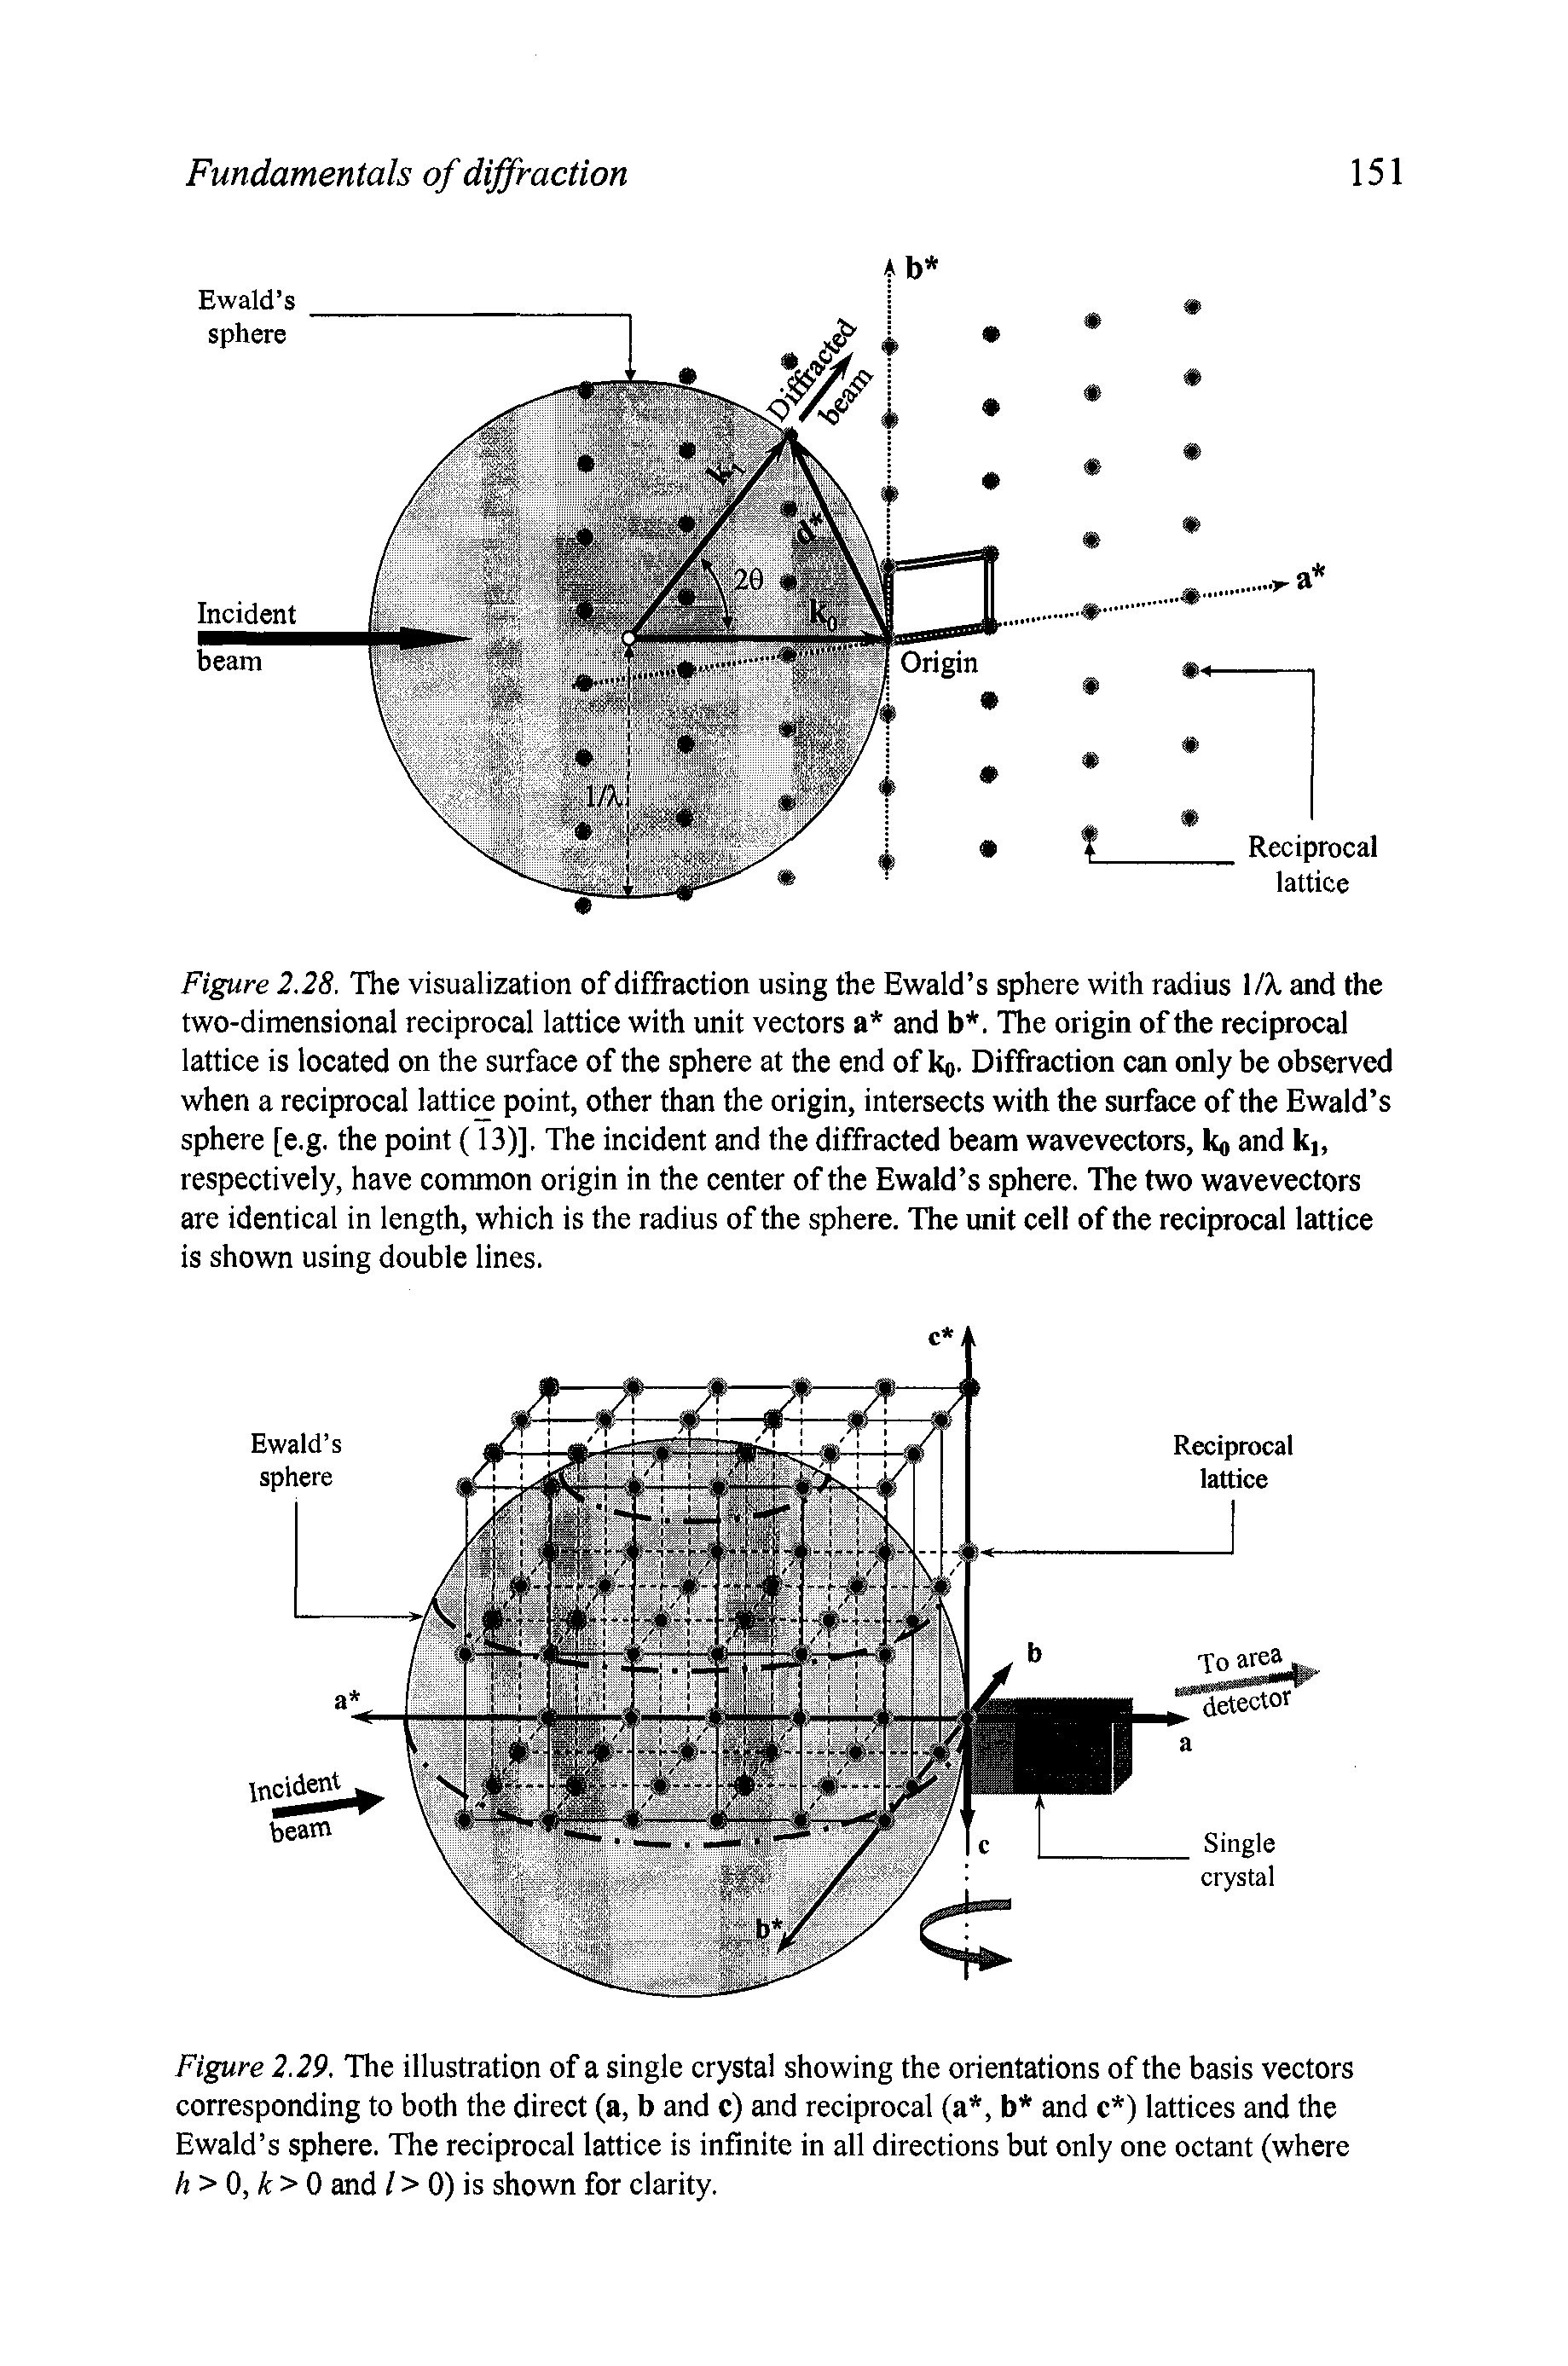 Figure 2.29. The illustration of a single crystal showing the orientations of the basis vectors corresponding to both the direct (a, b and c) and reciprocal (a, b and c ) lattices and the Ewald s sphere. The reciprocal lattice is infinite in all directions but only one octant (where h>0,k>0 and / > 0) is shown for clarity.